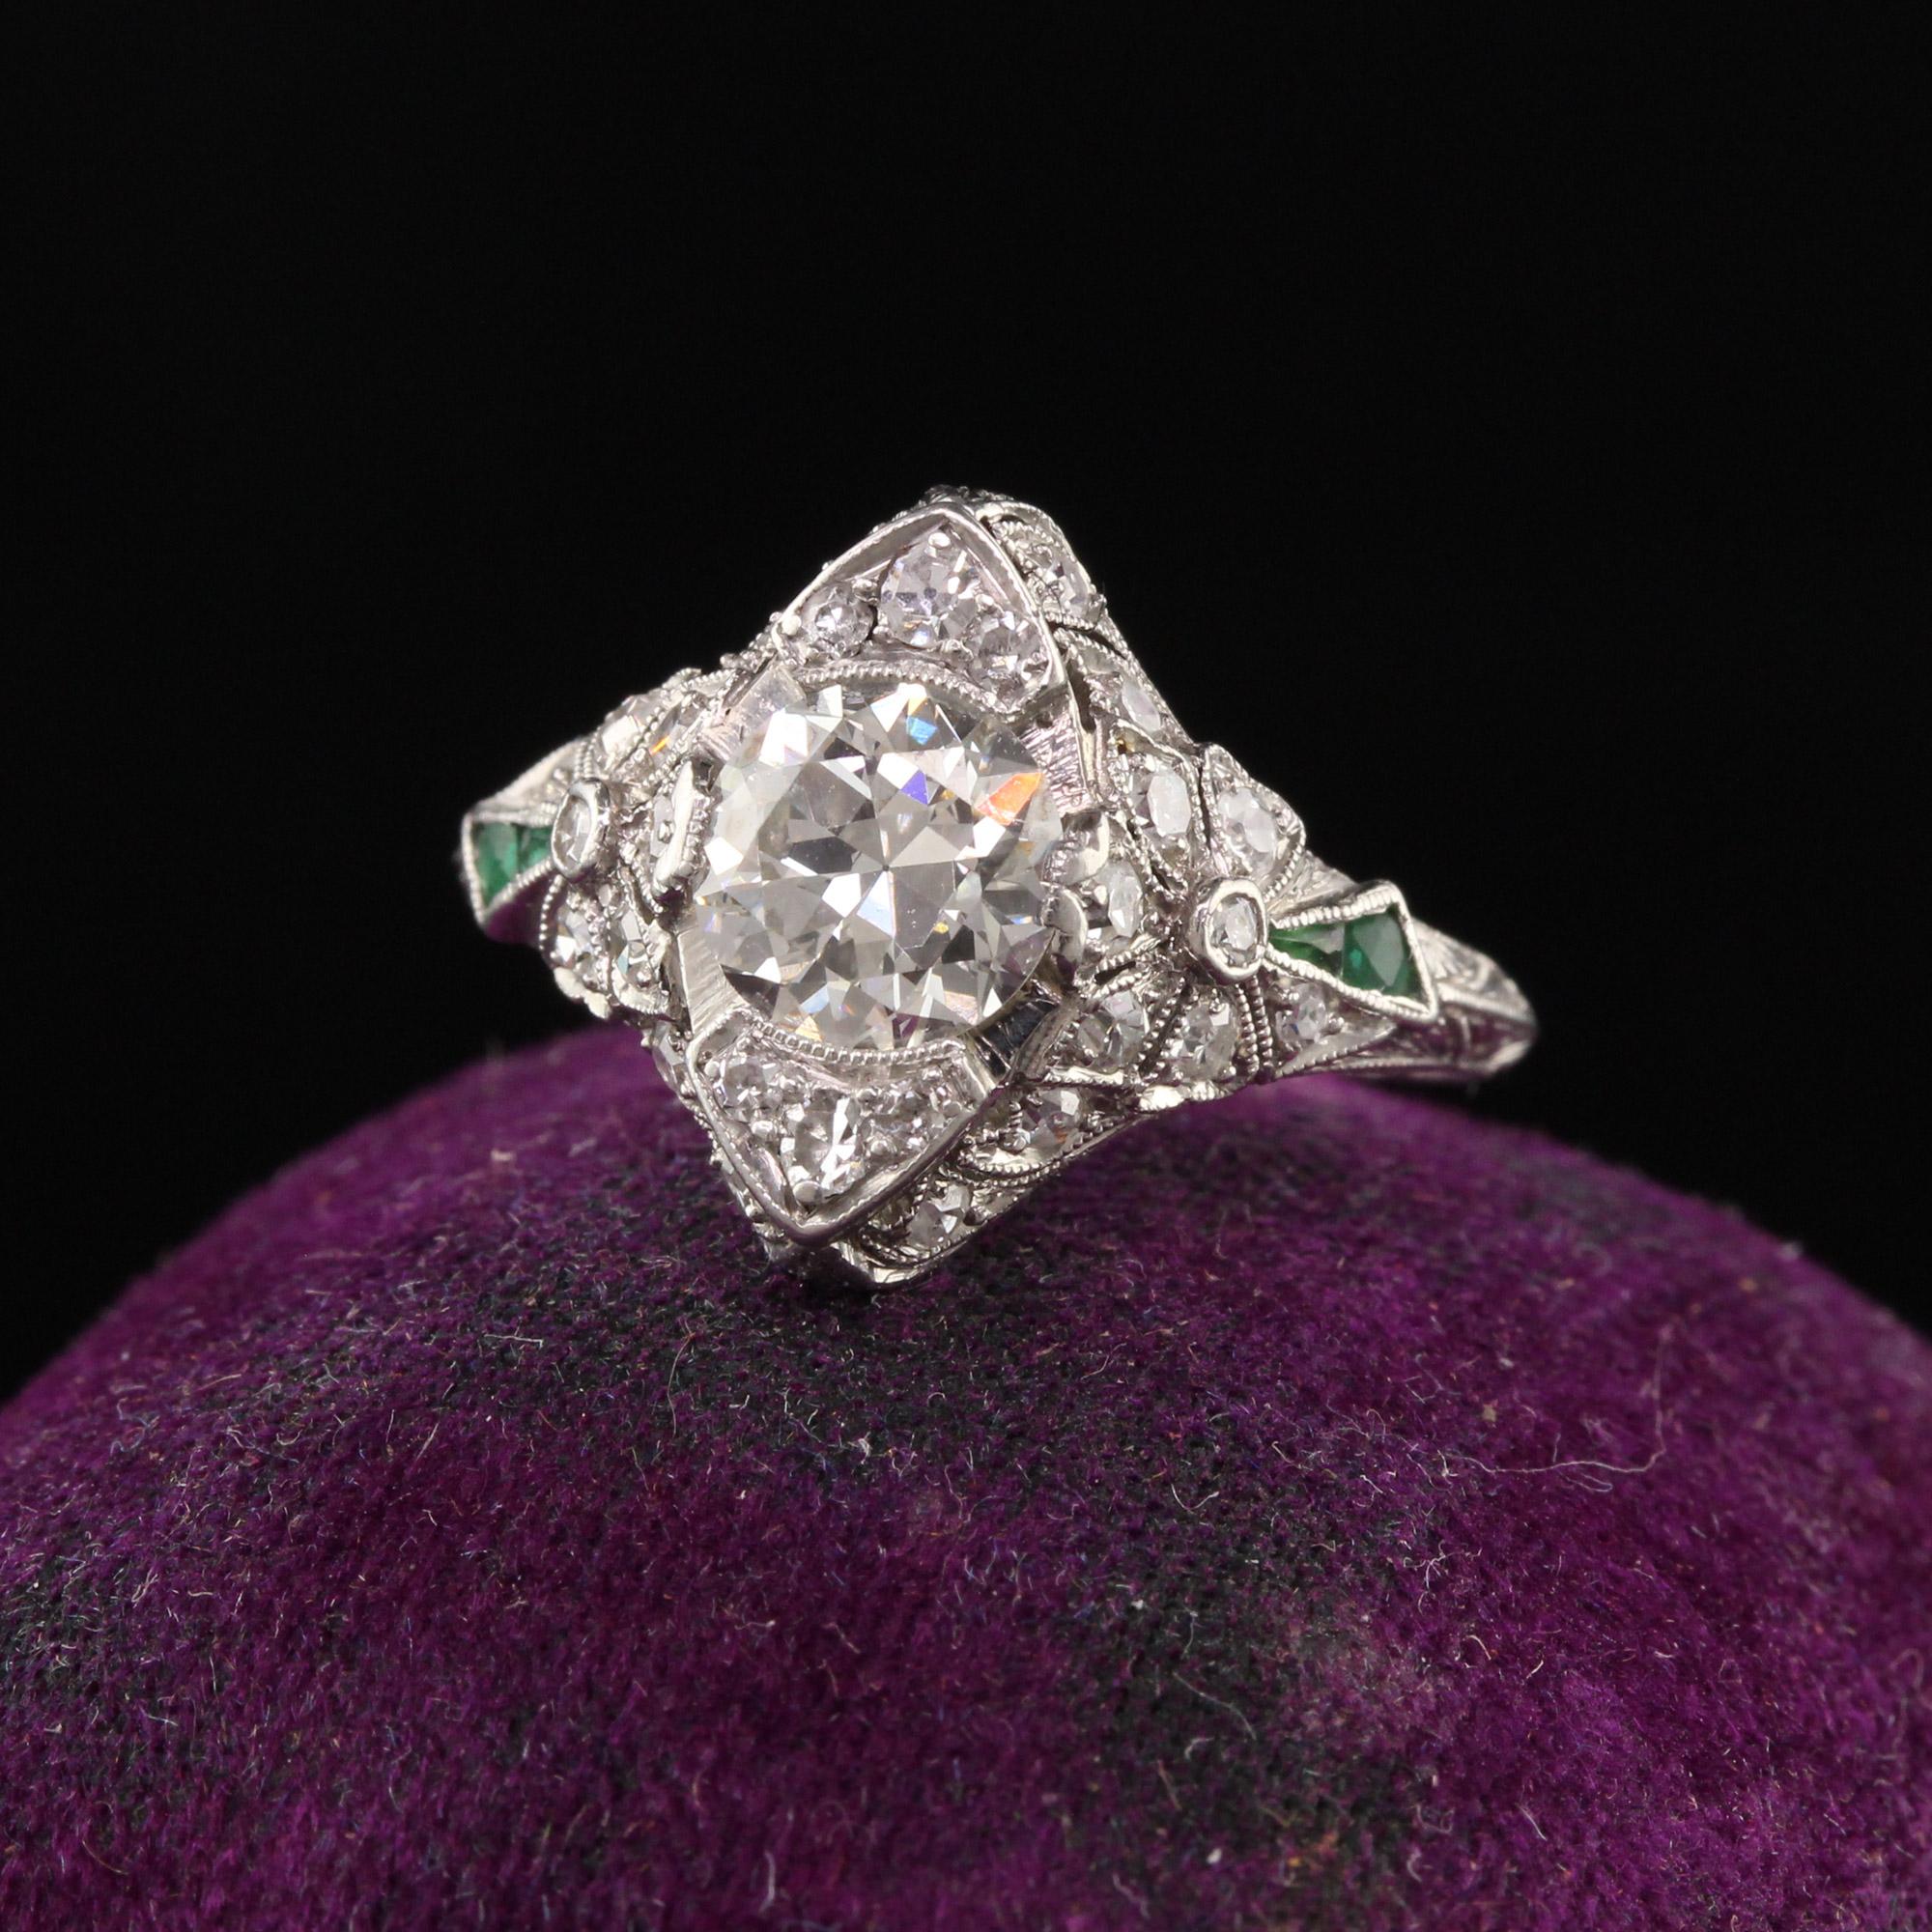 Beautiful Antique Edwardian Platinum Old European Cut Diamond Flower Motif Engagement Ring. This gorgeous ring is crafted in platinum. The center holds an old european cut diamonds that is white and clean. The mounting is in amazing condition with